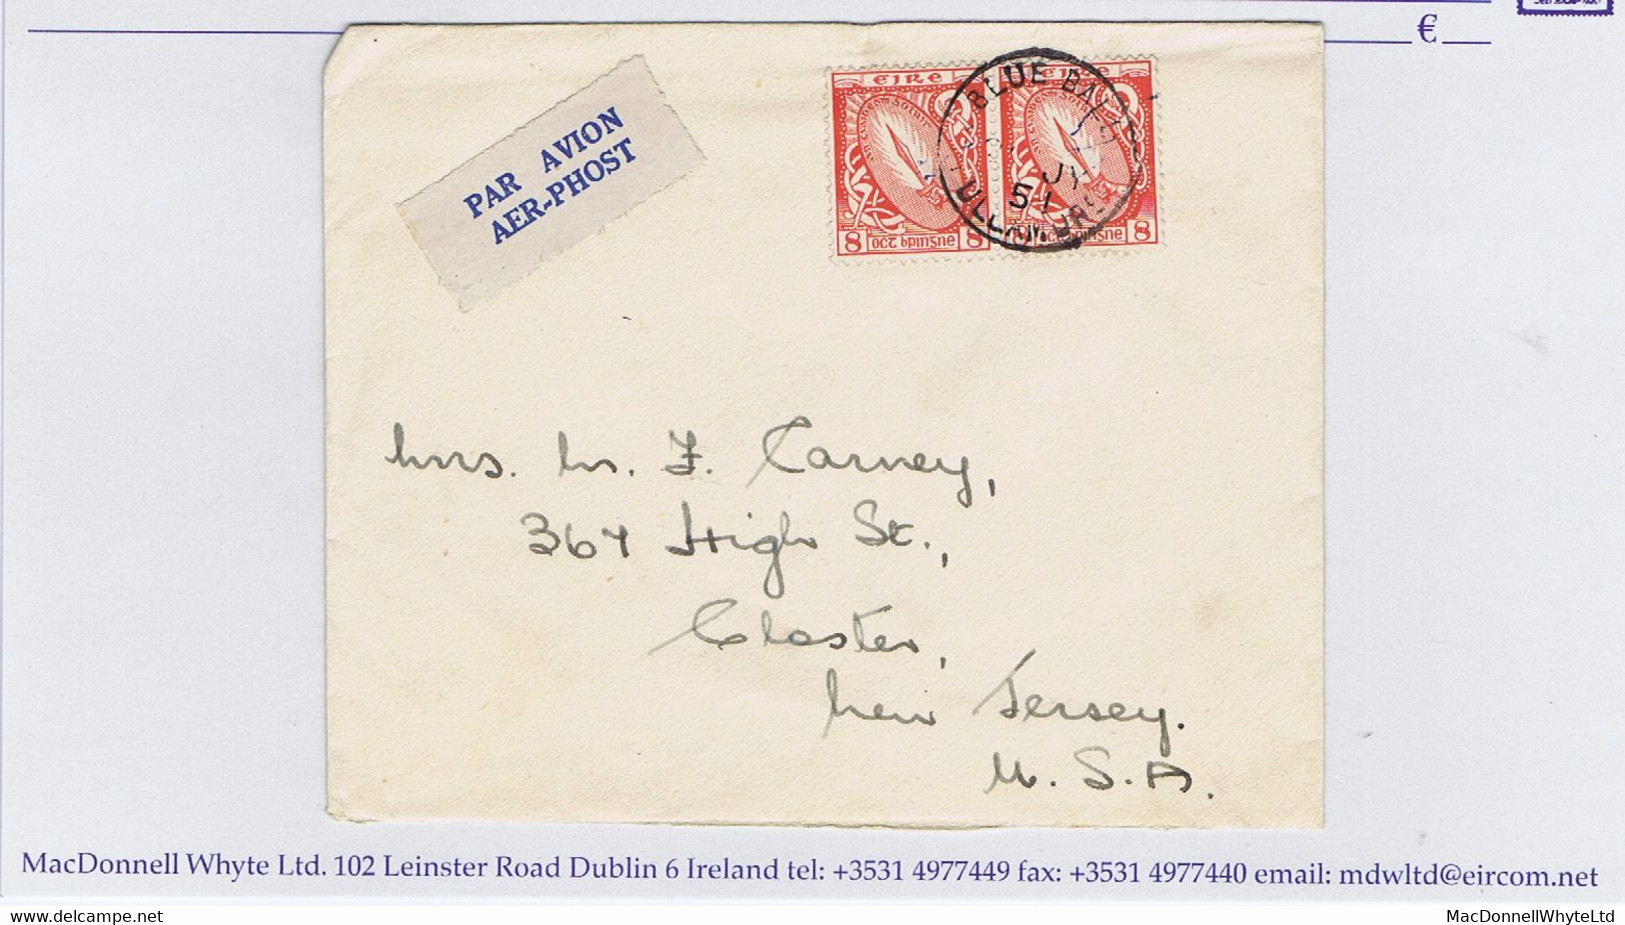 Ireland Airmail Offaly 1s4d Rate 1949 8d Sword Pair Paying 16pence Airmail Rate On Cover To USA Tied BLUE BALL Cds - Airmail